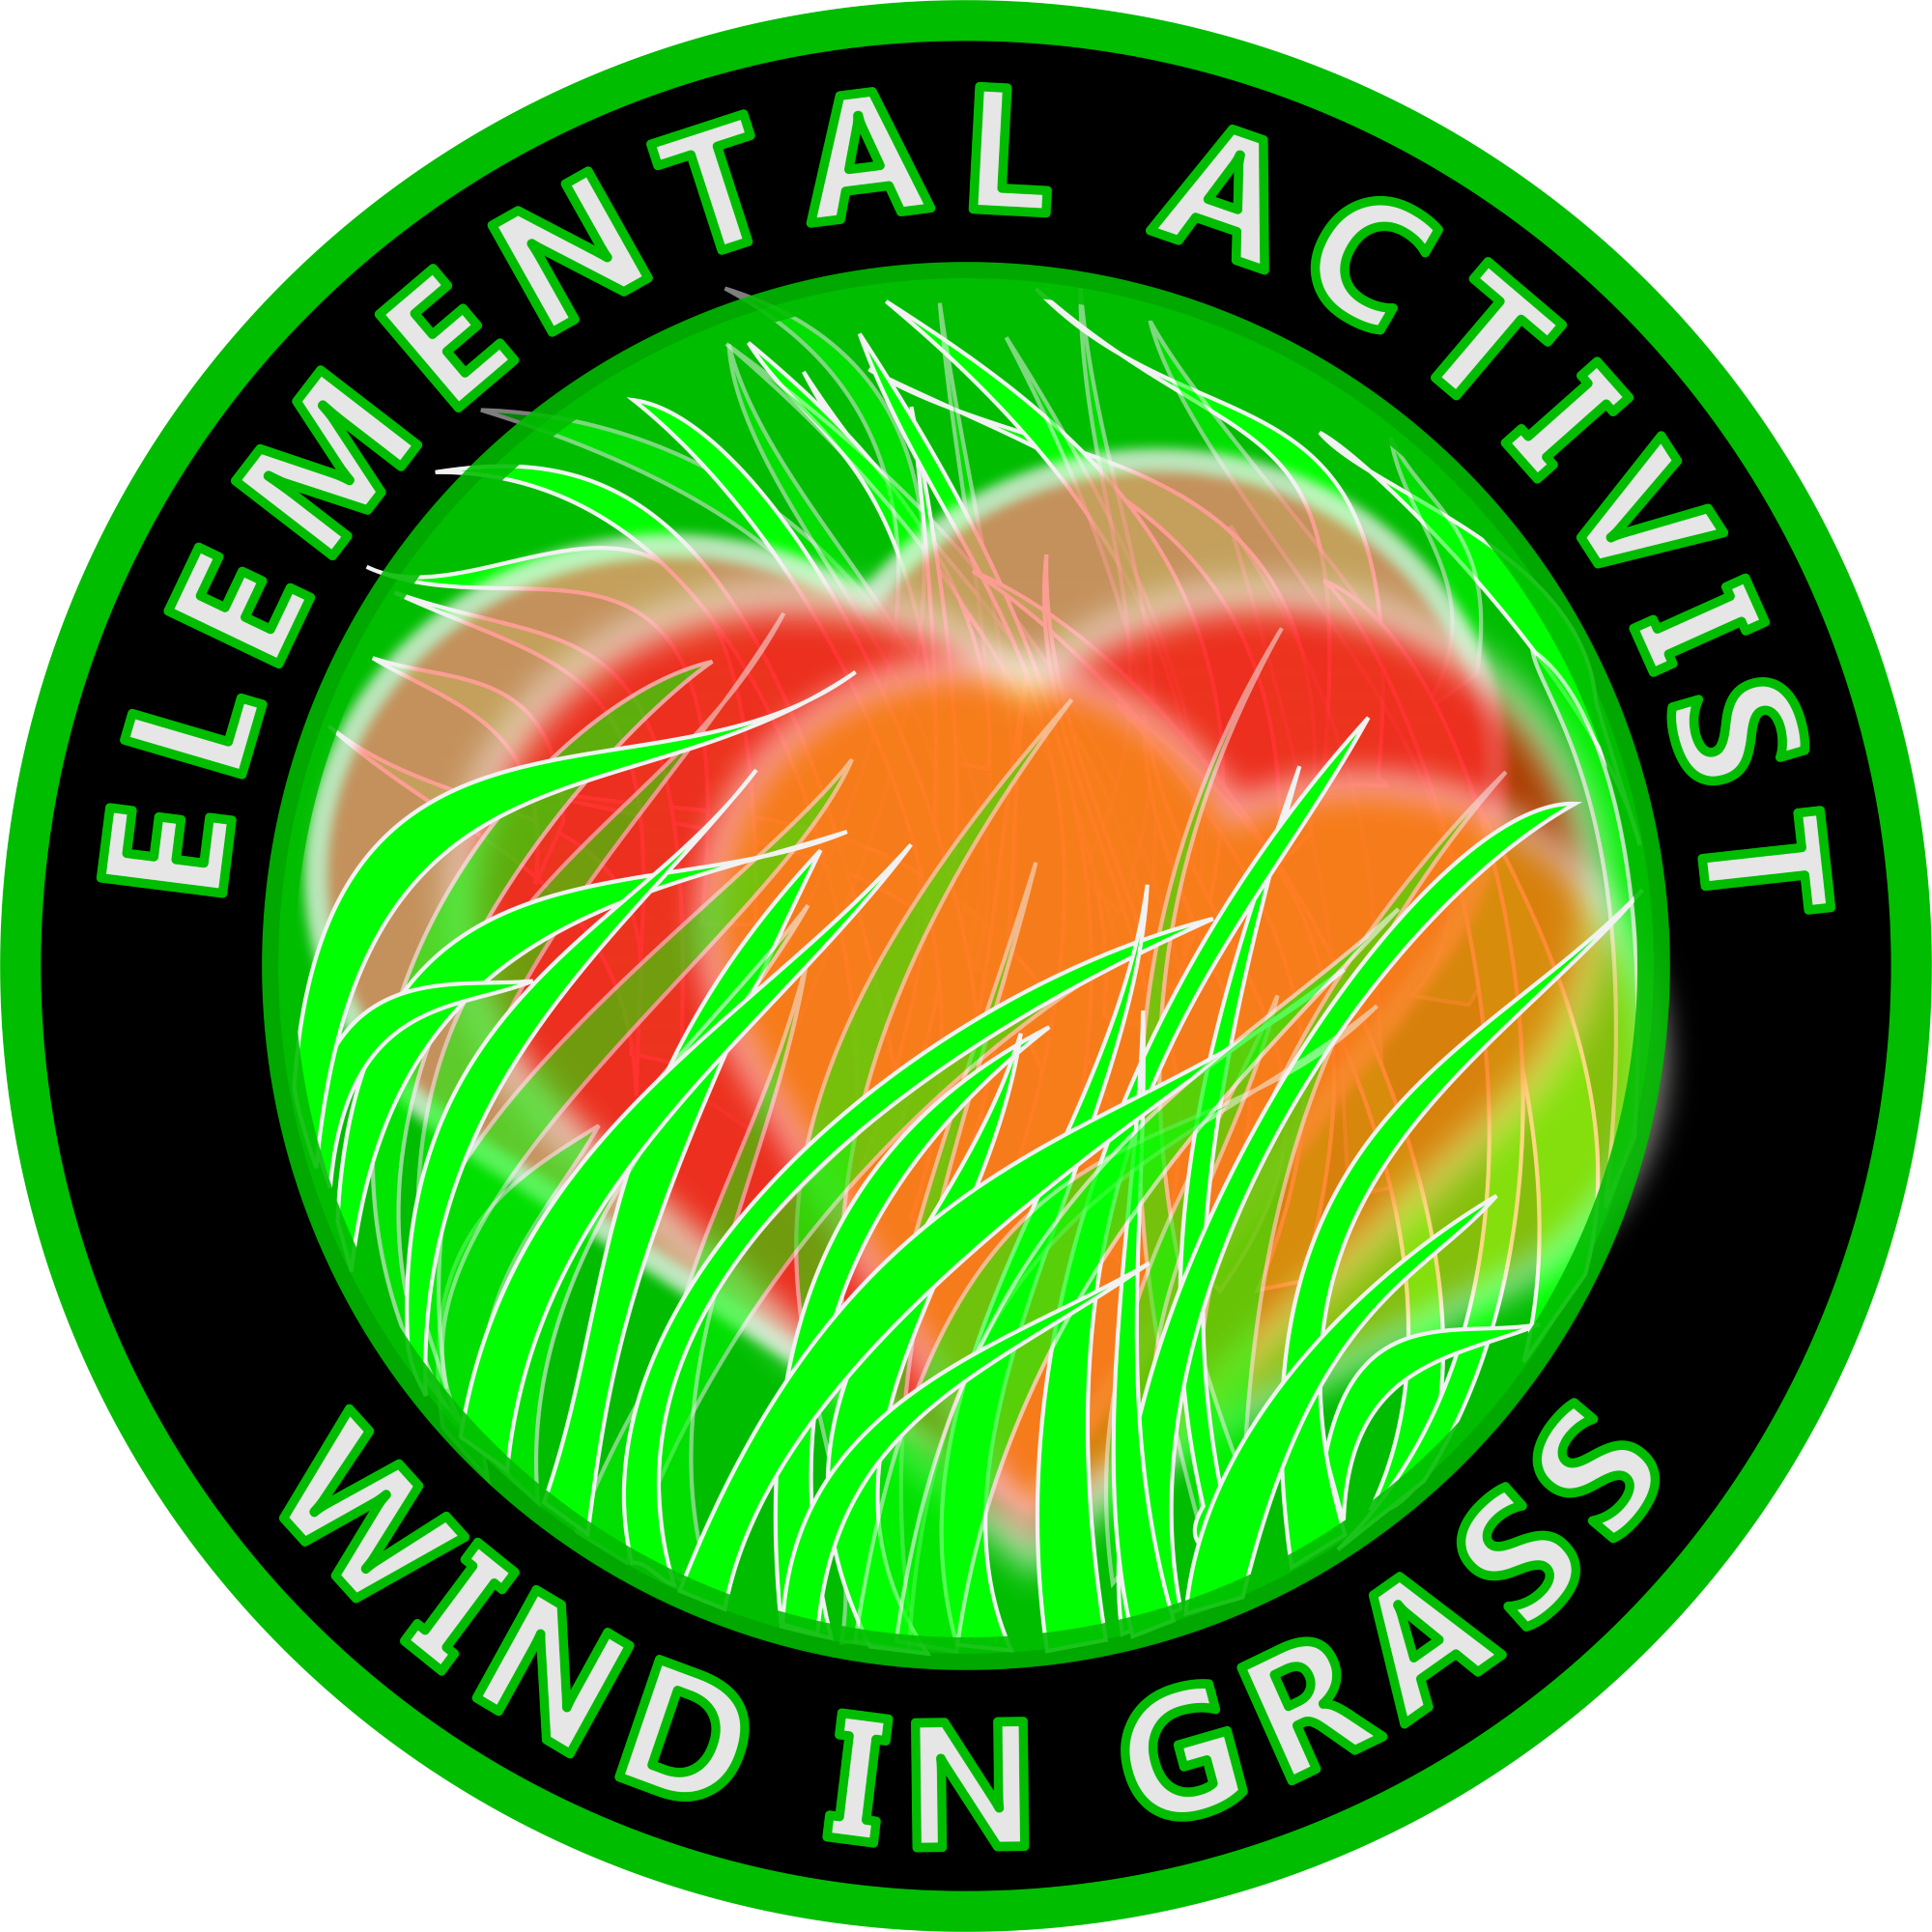 15 wind in grass large.png